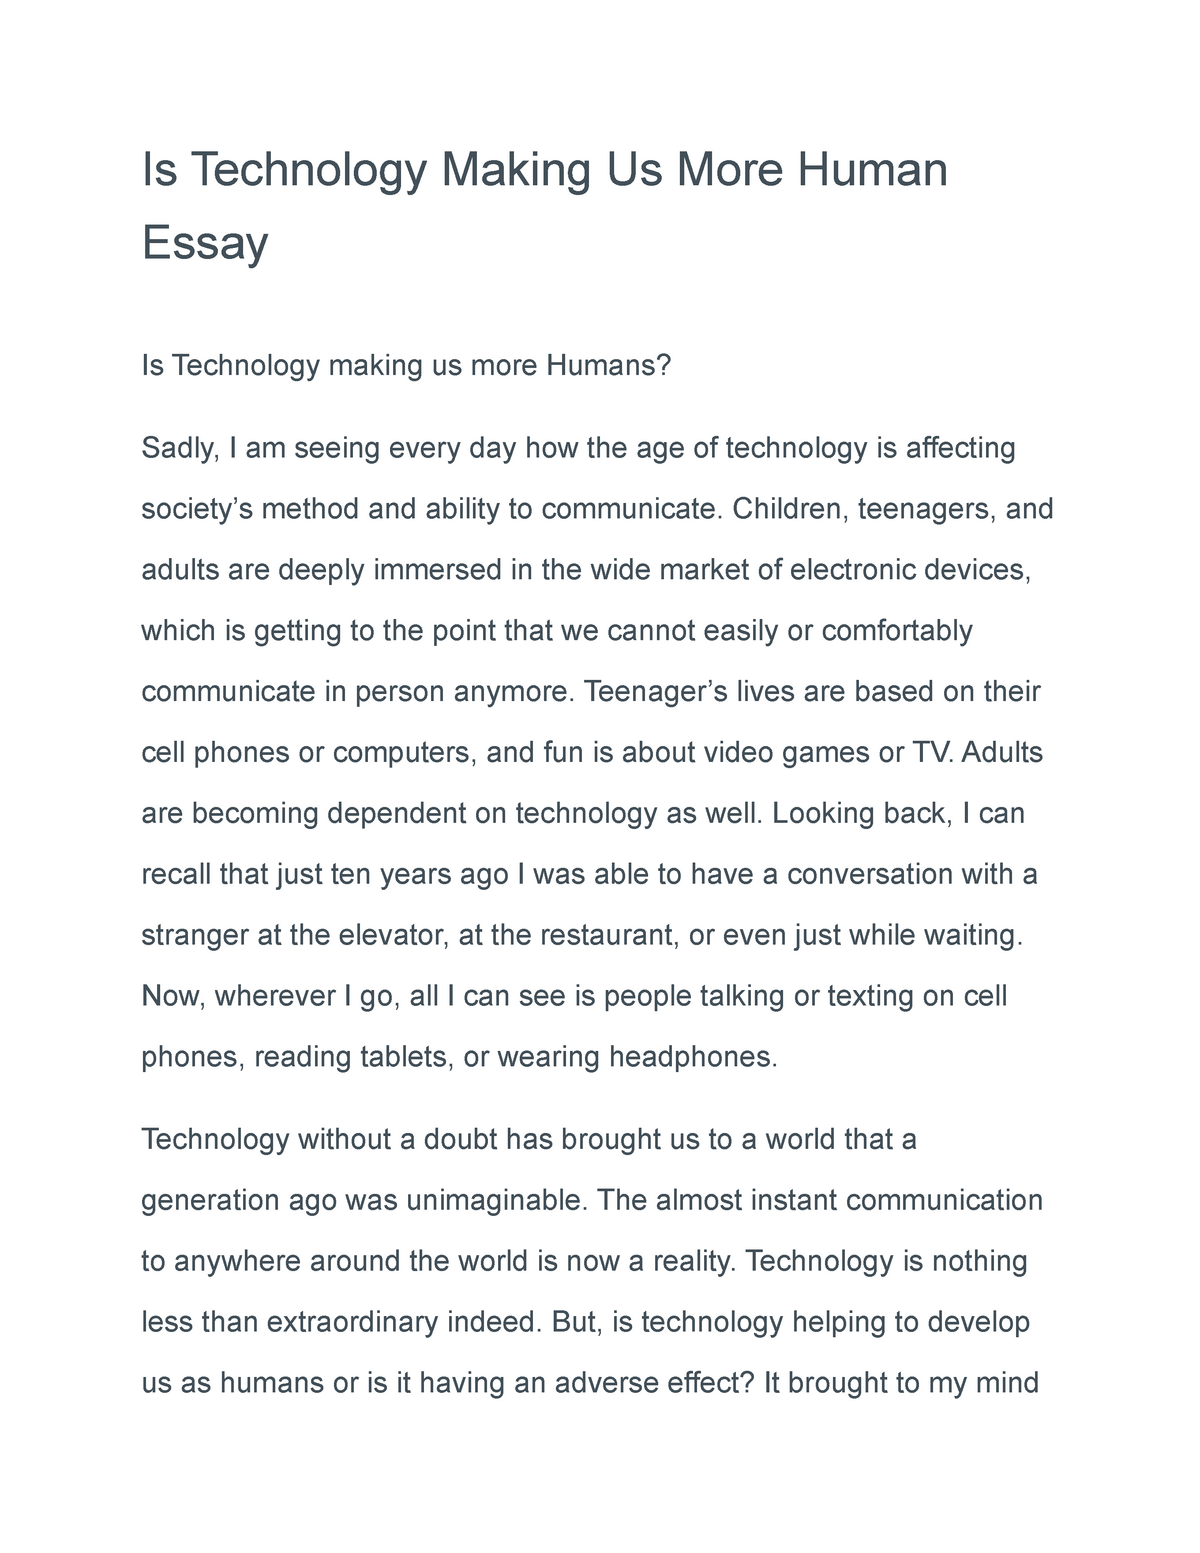 technology and humanity essay